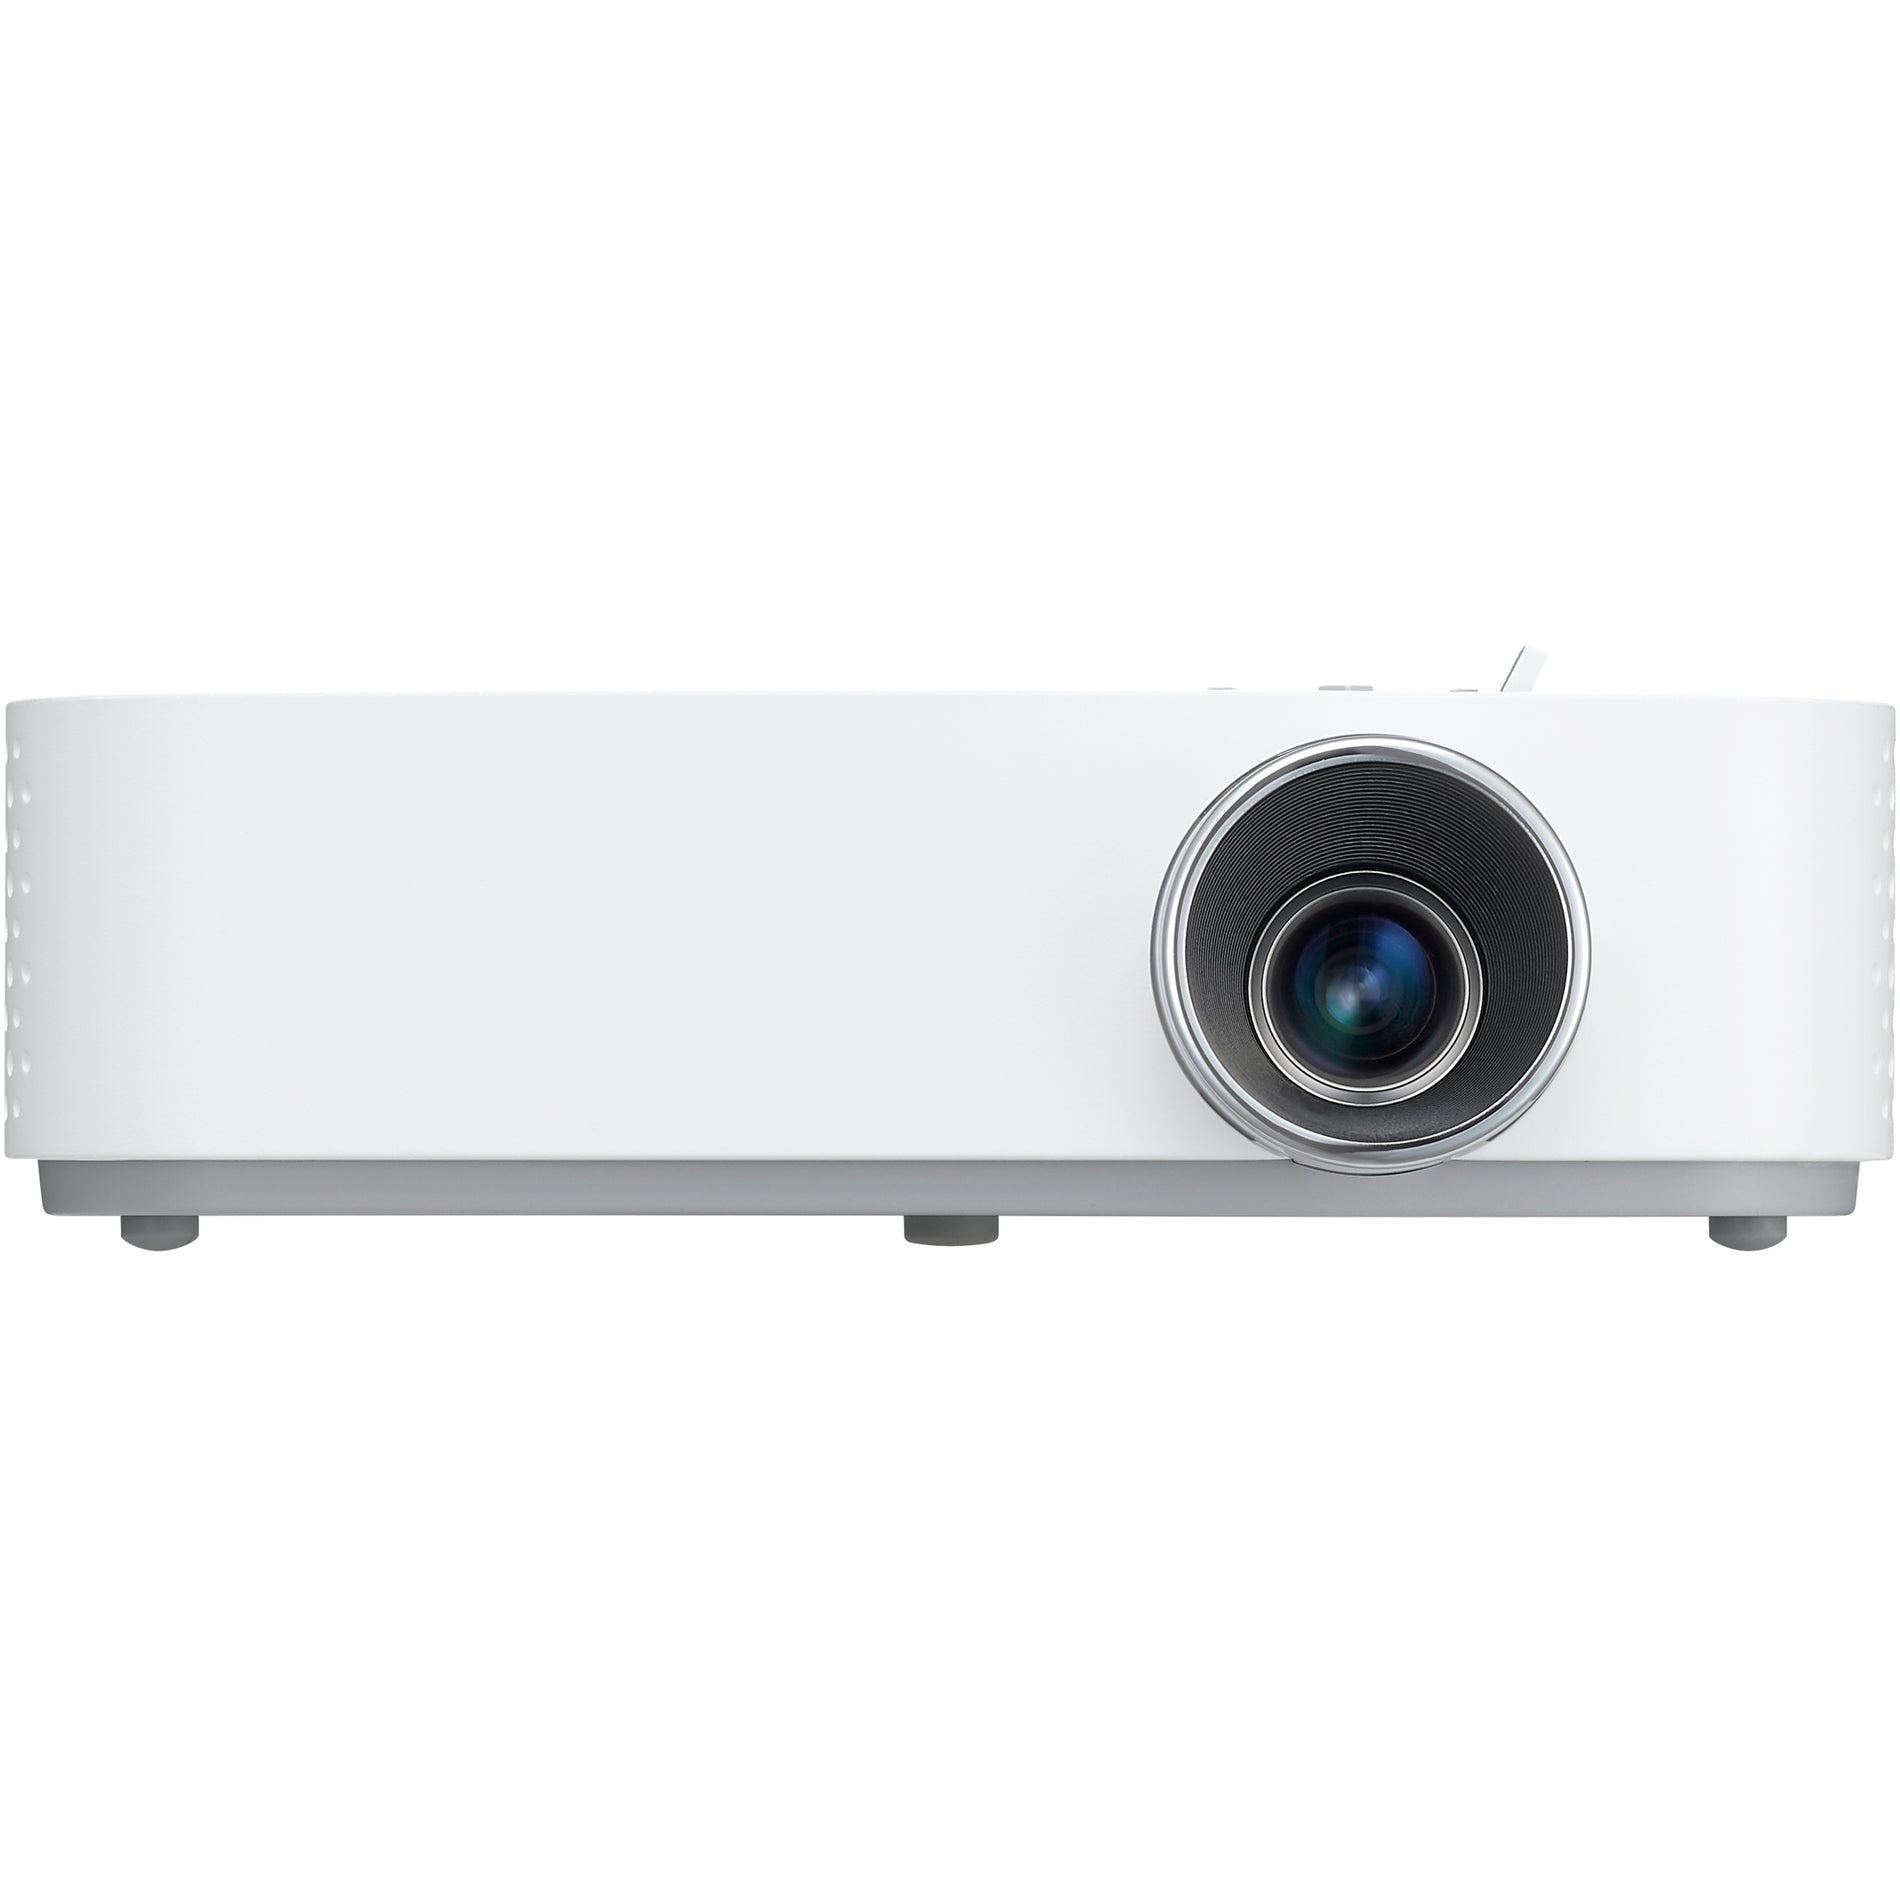 LG PF50KA Full HD LED Smart Home Theater Projector With Built-In Battery, 16:9, 600 lm